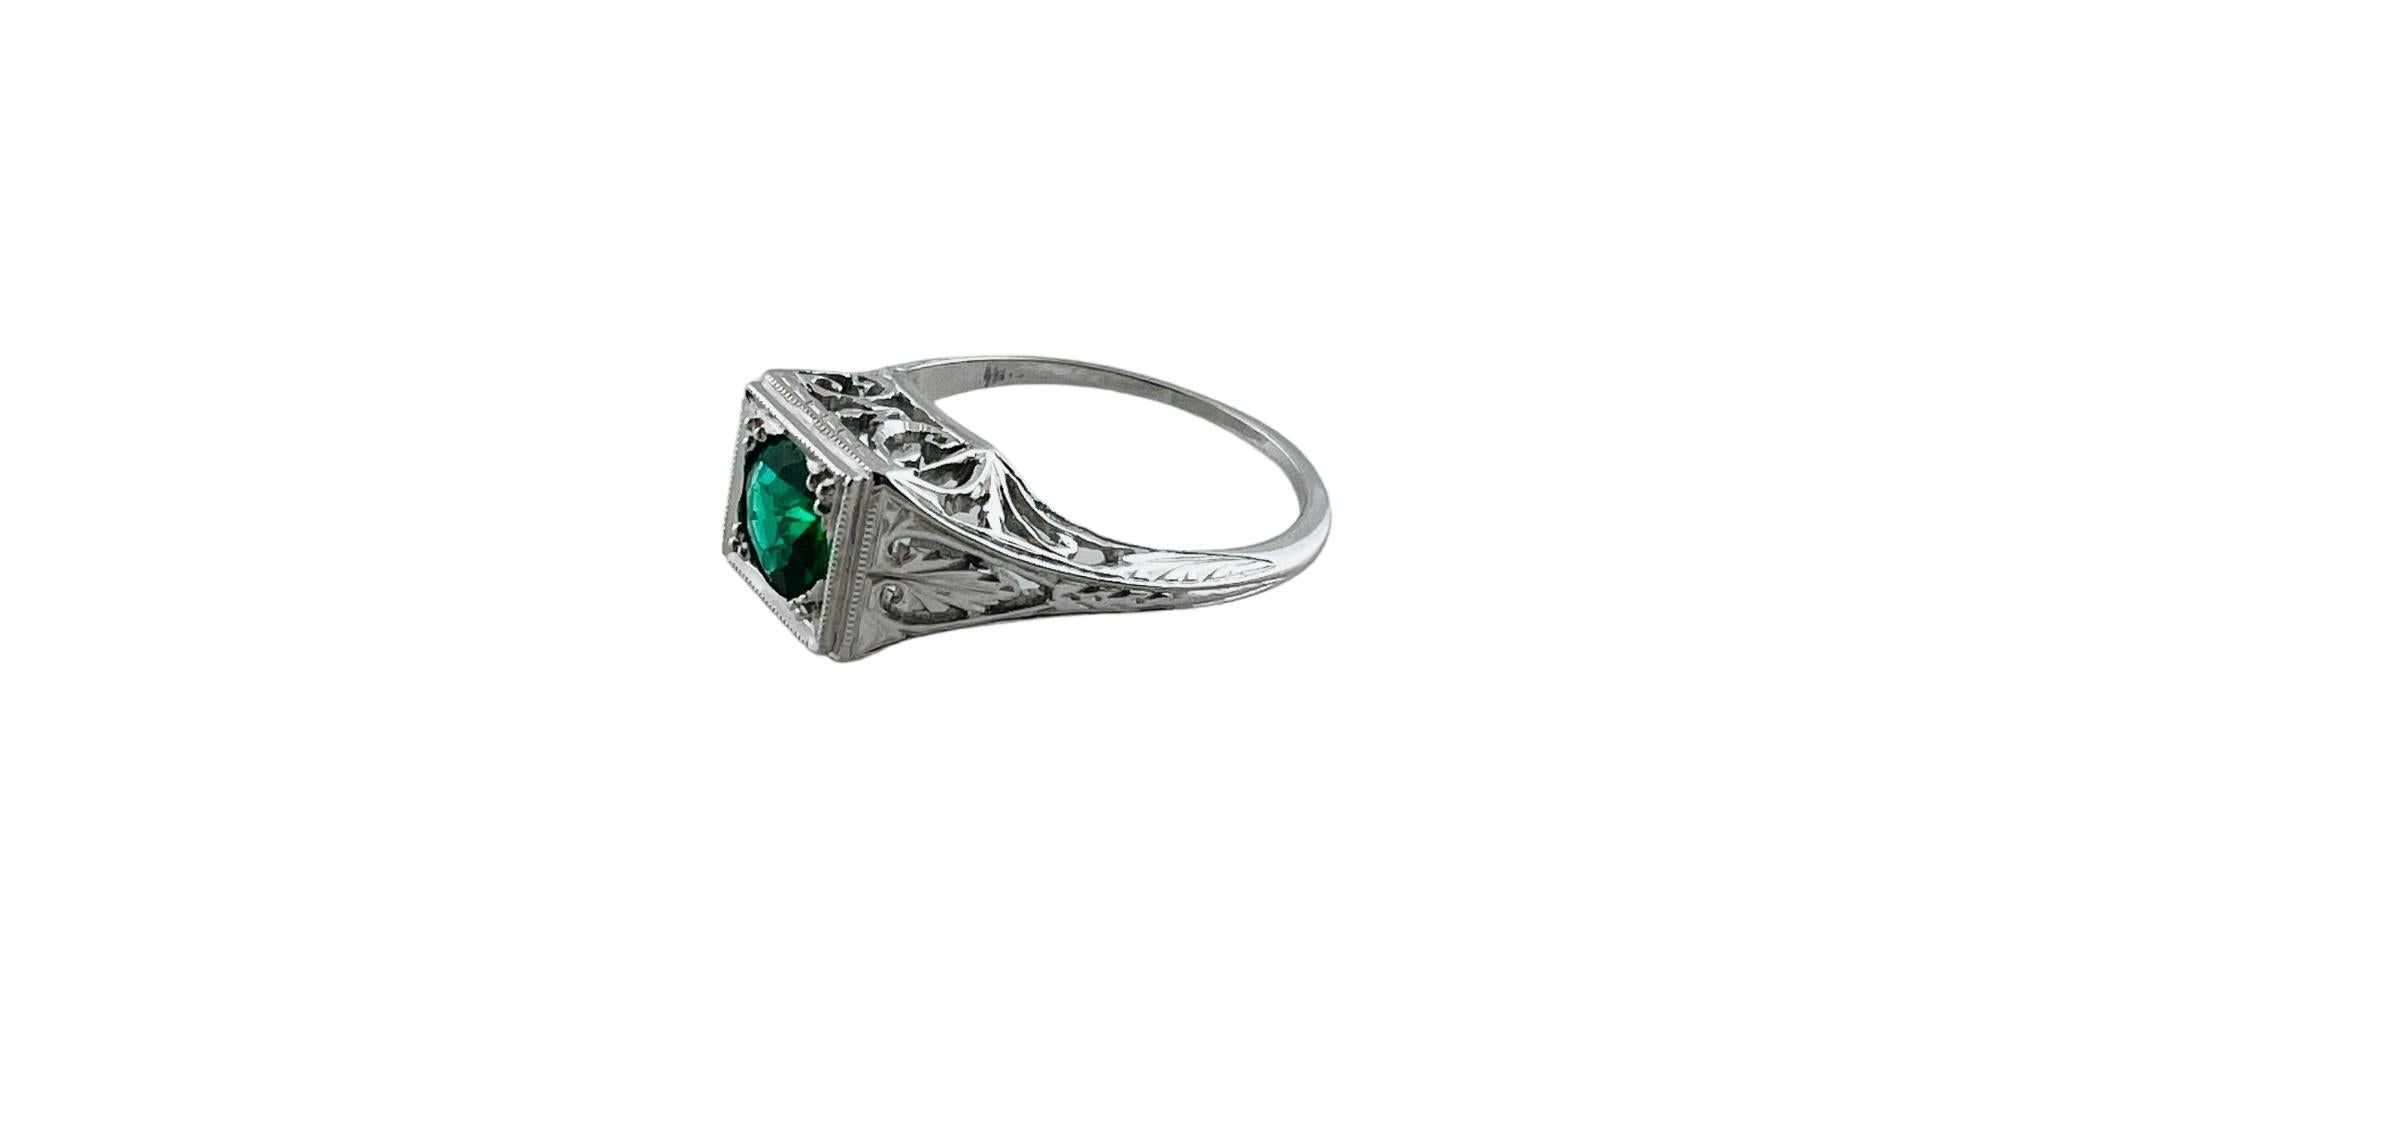 This beautiful white gold ring has a filigree design and a square dome accented with a scroll and leaf design.

Center faceted stone is a round green garnet and glass doublet

Stamped 18K

Shank is approx. 1mm

Front of ring is approx. 7.3 x 8.0 x